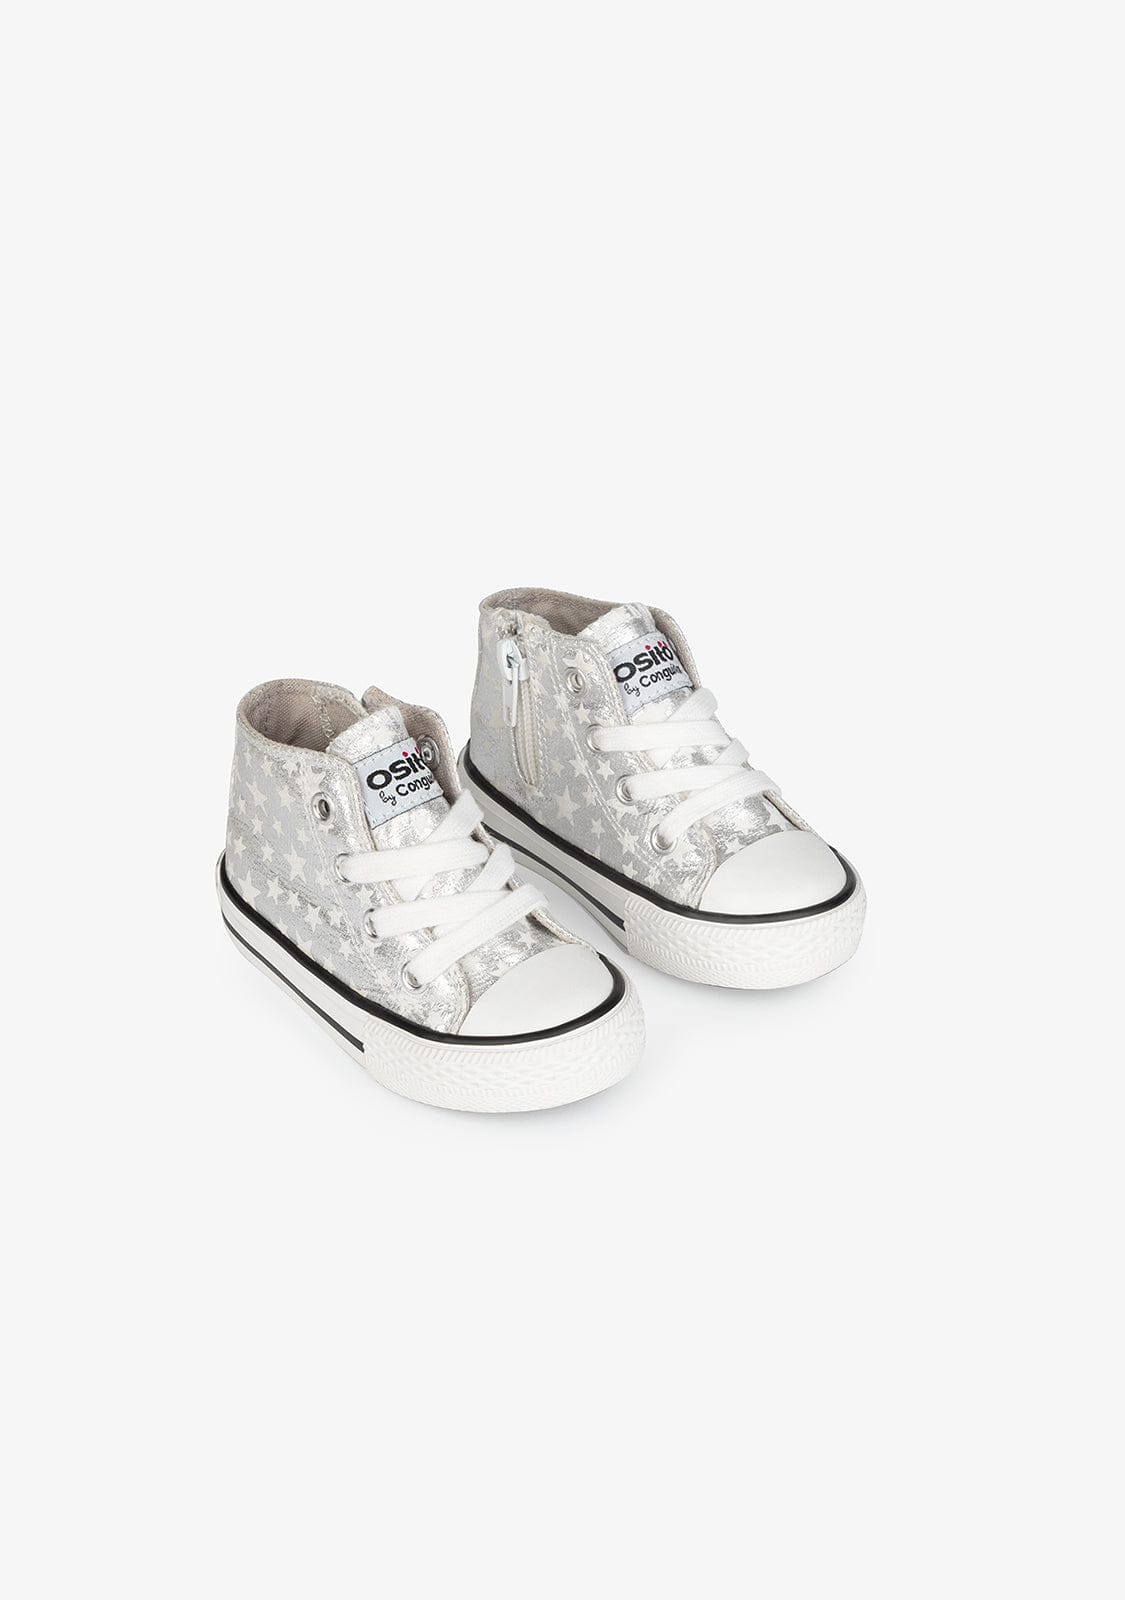 OSITO Shoes Baby's Silver Glows in the Dark Hi-Top Sneakers